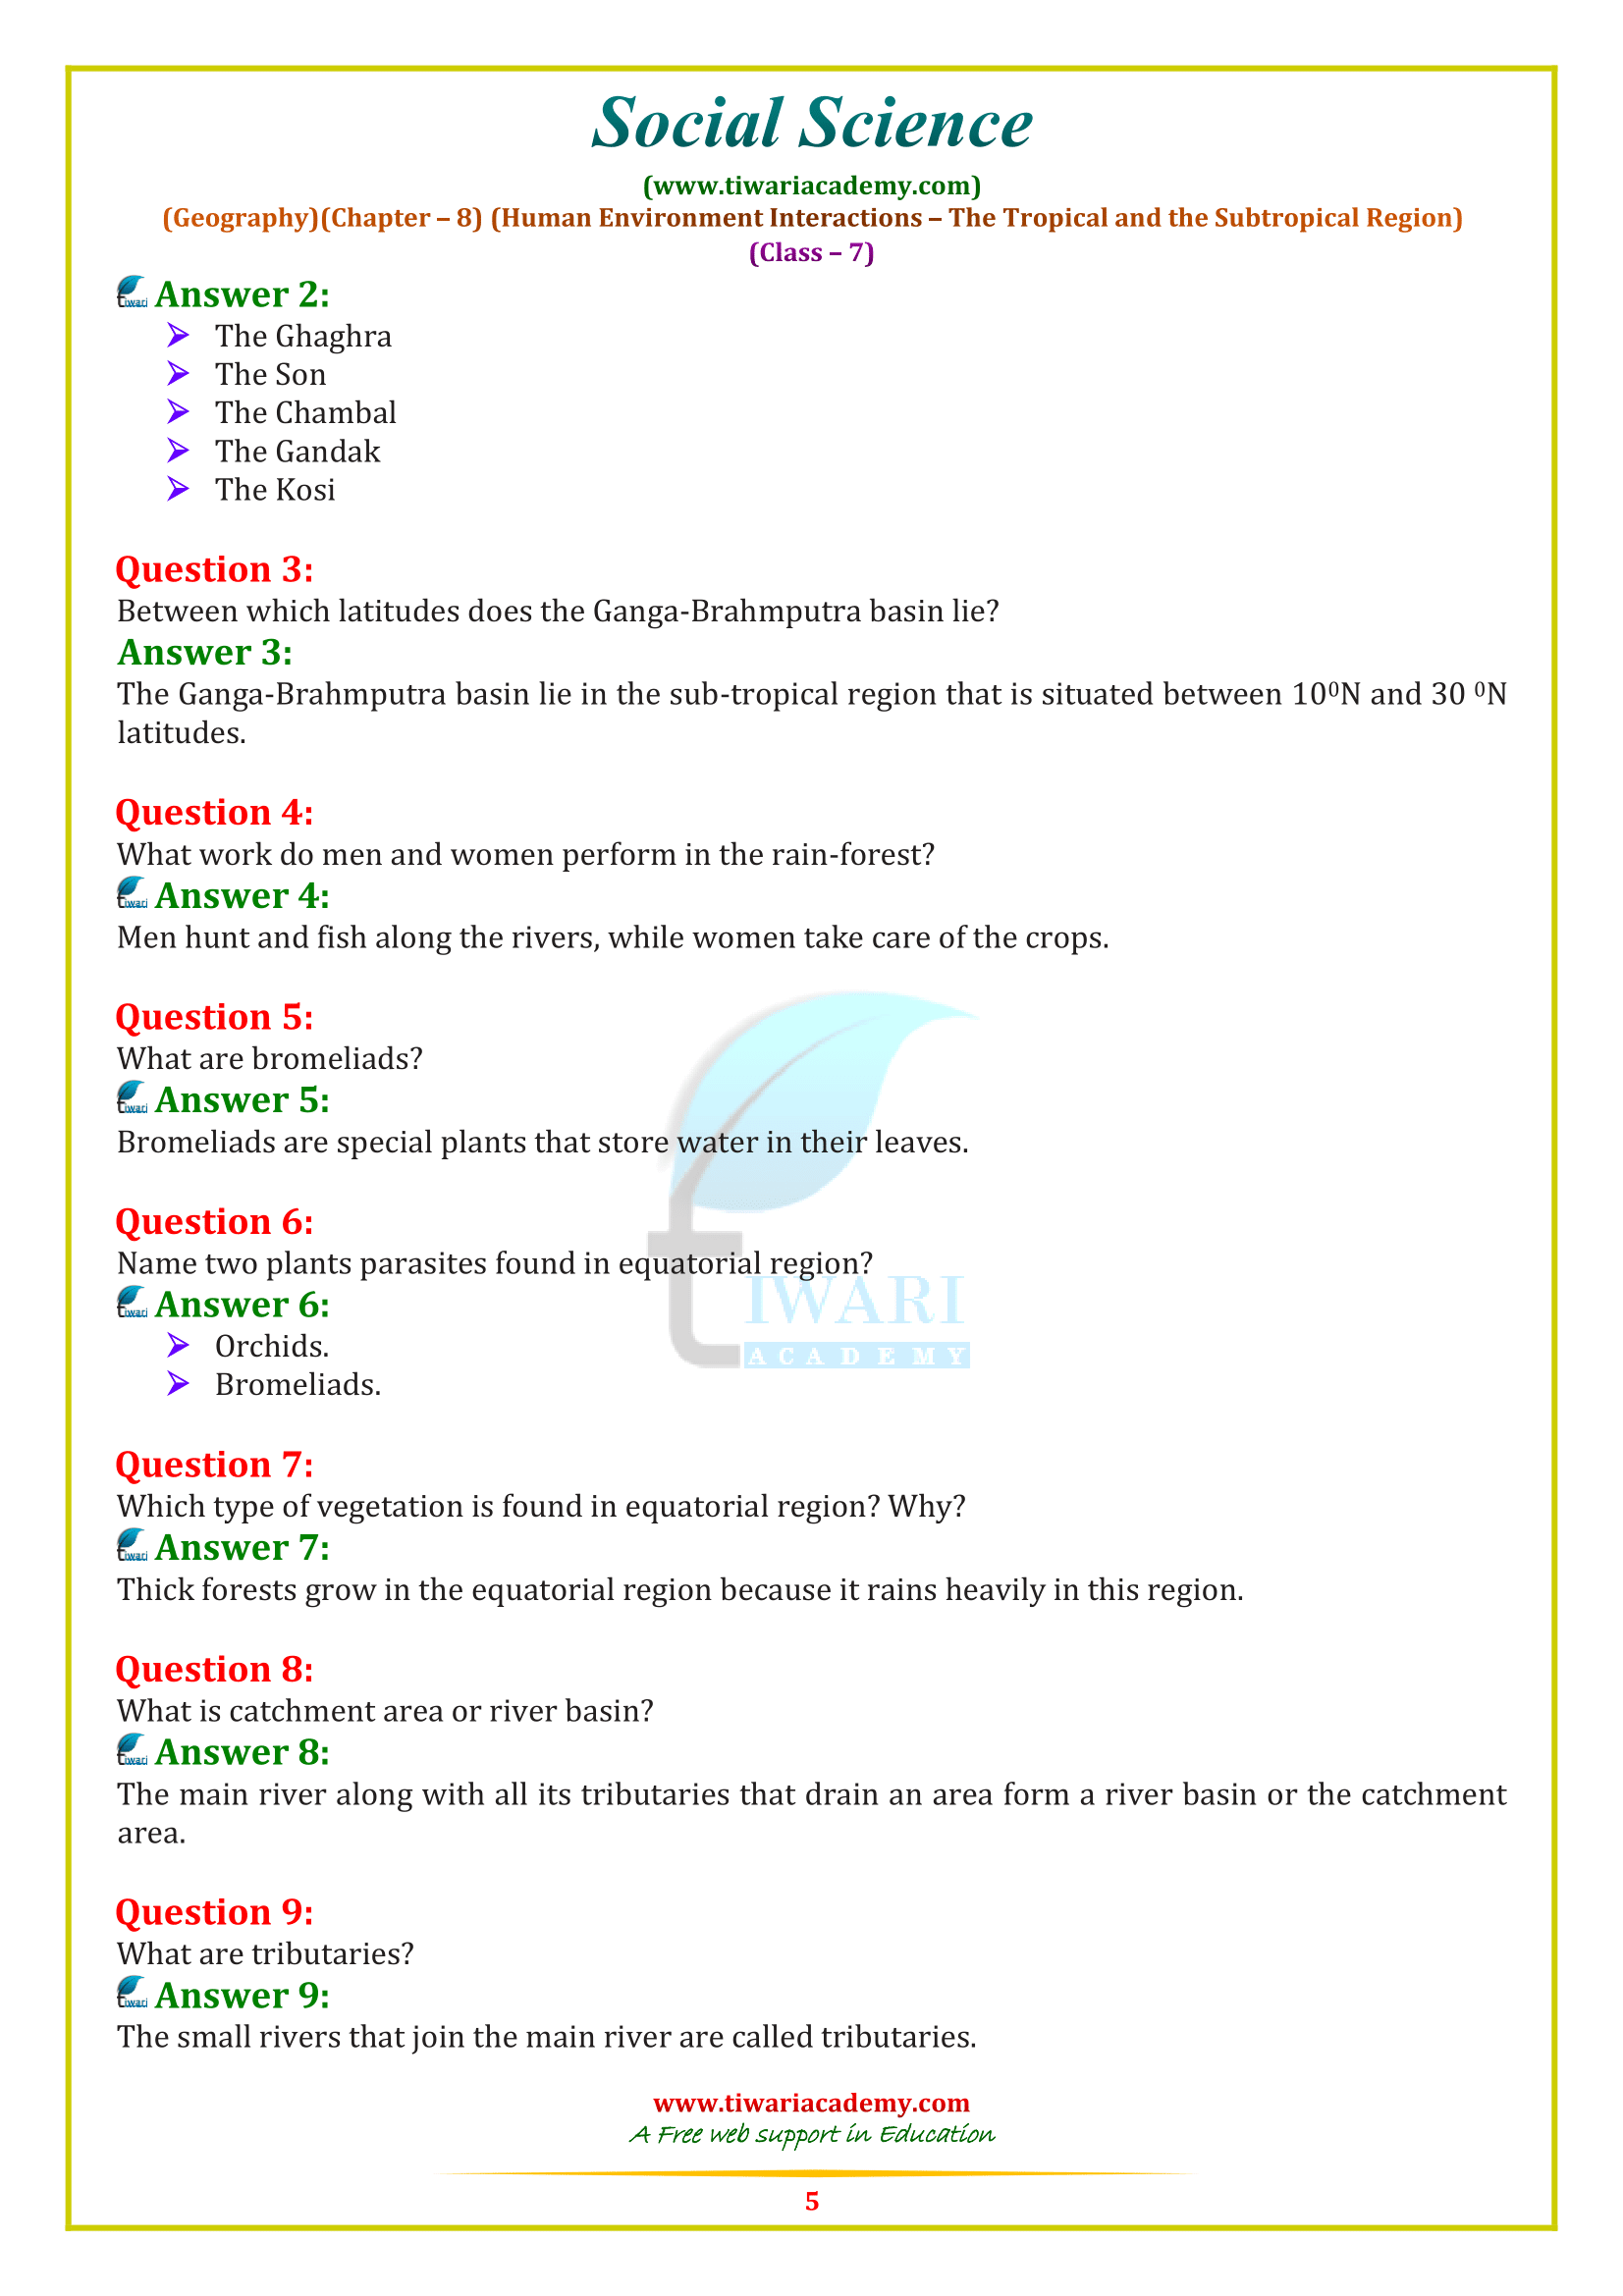 class 7 geography Chapter 8 Questions answers